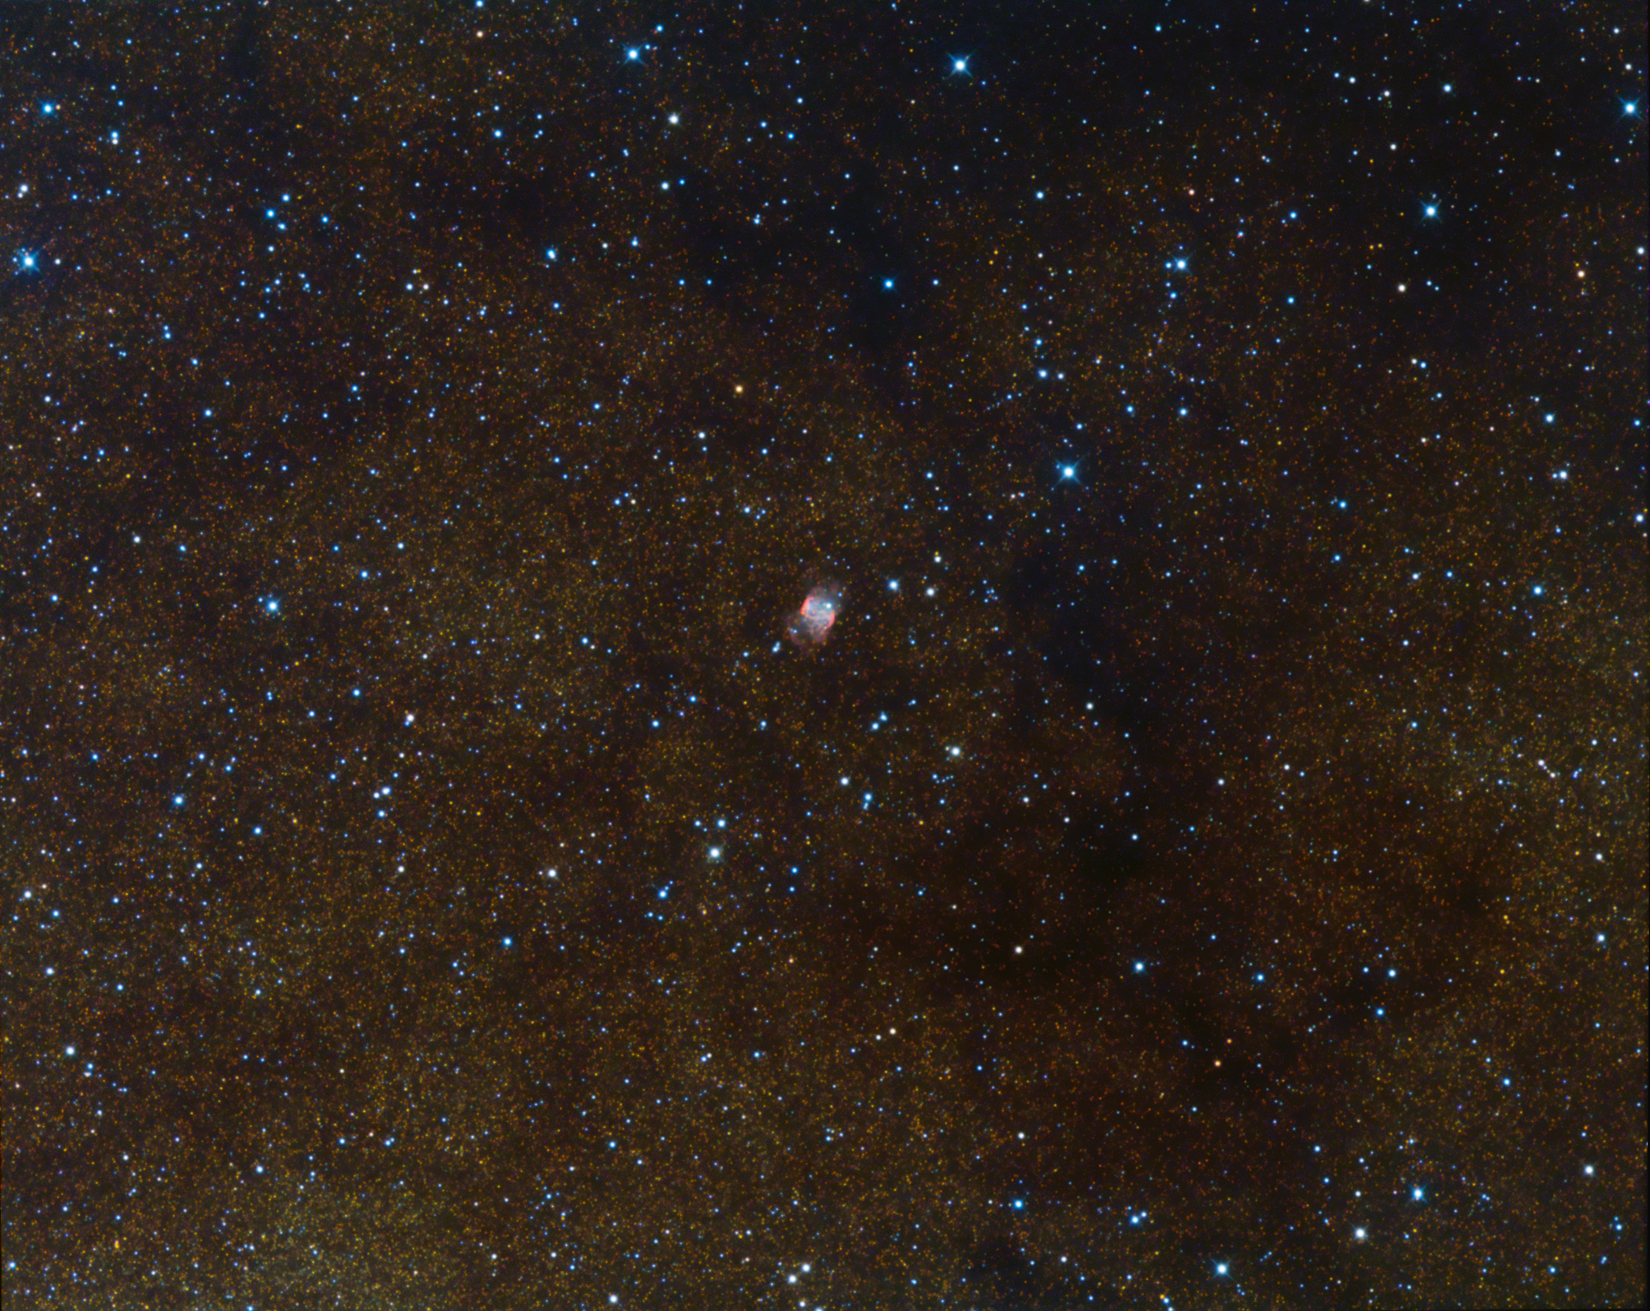 K1-4 and the golden Ophiuchus star clouds